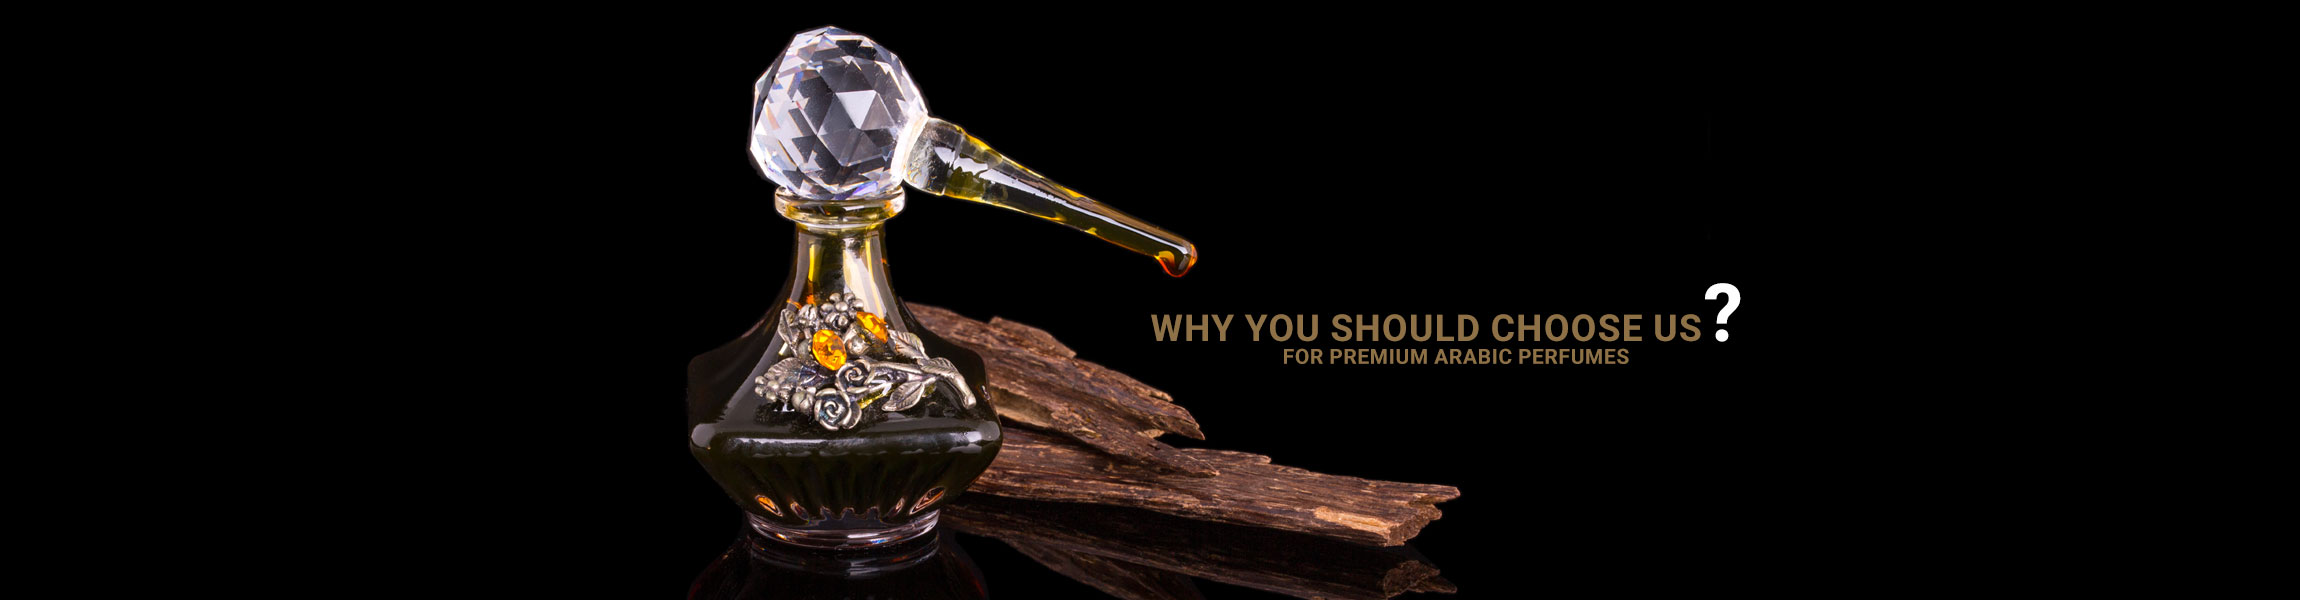 Why You Should Choose Us for Premium Arabic Perfumes